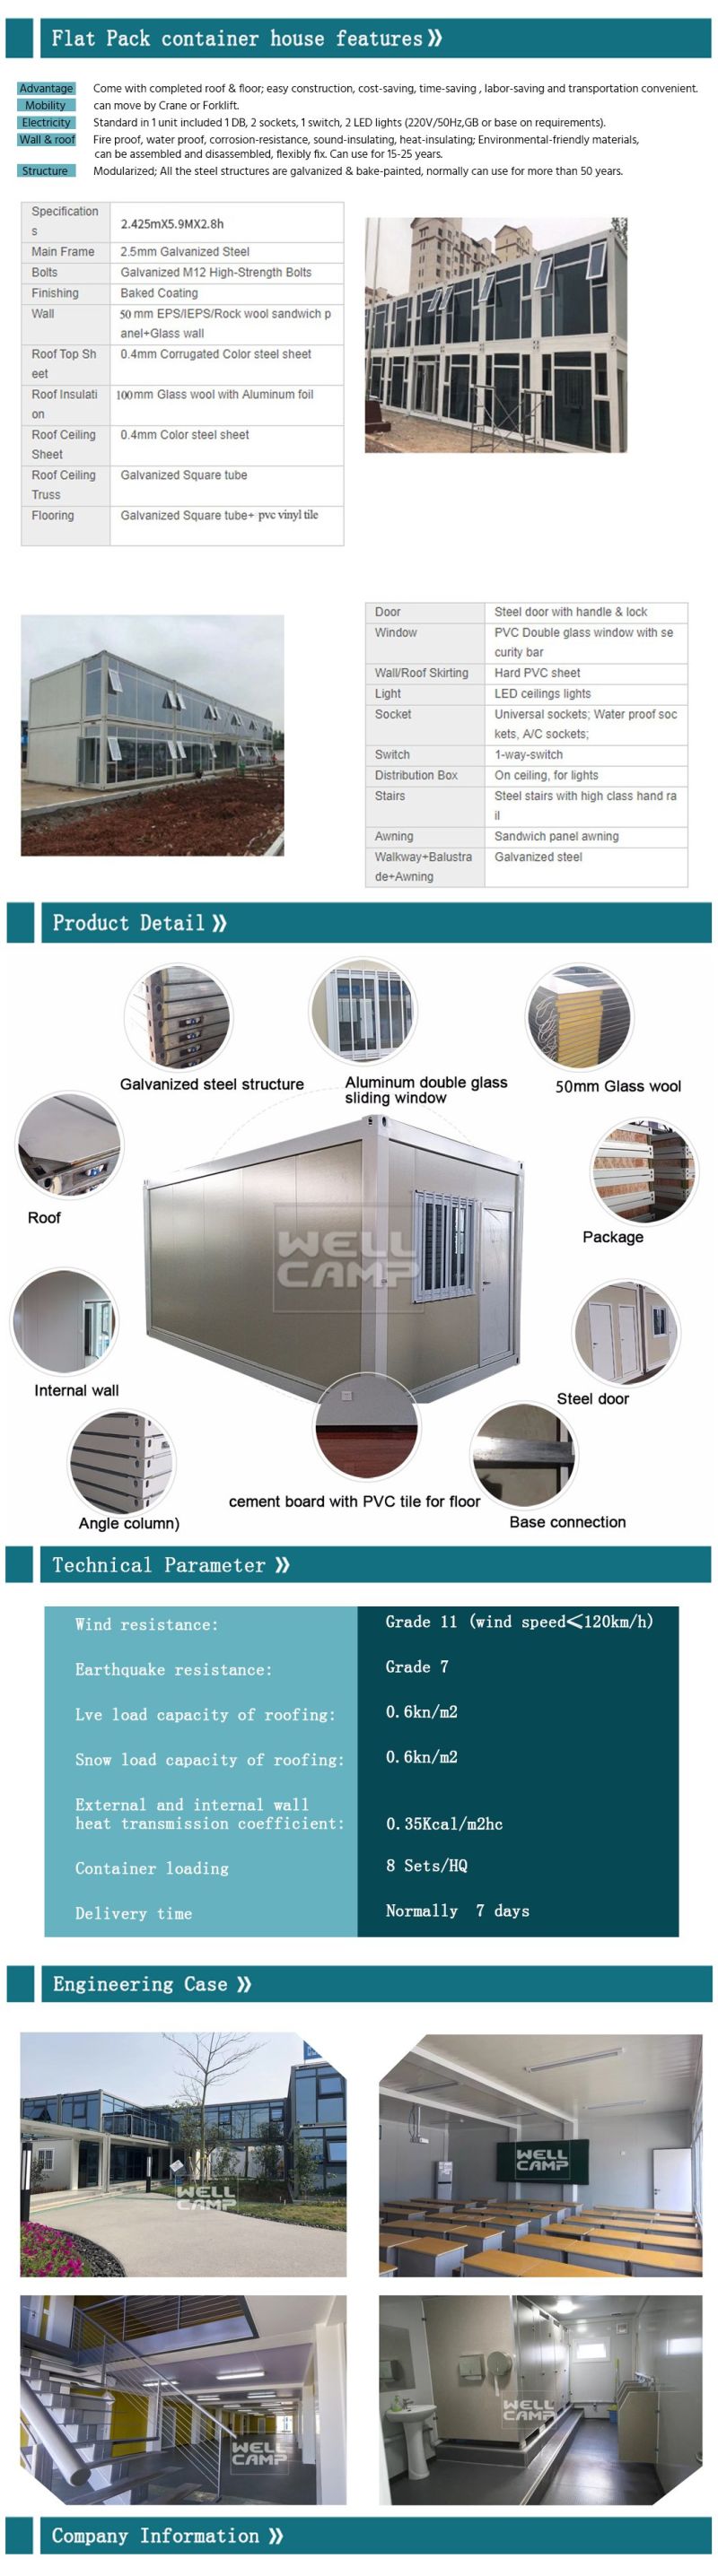 20FT Prefab Mobile Expandable Flat Pack Container House for Labor Camp Accommodation